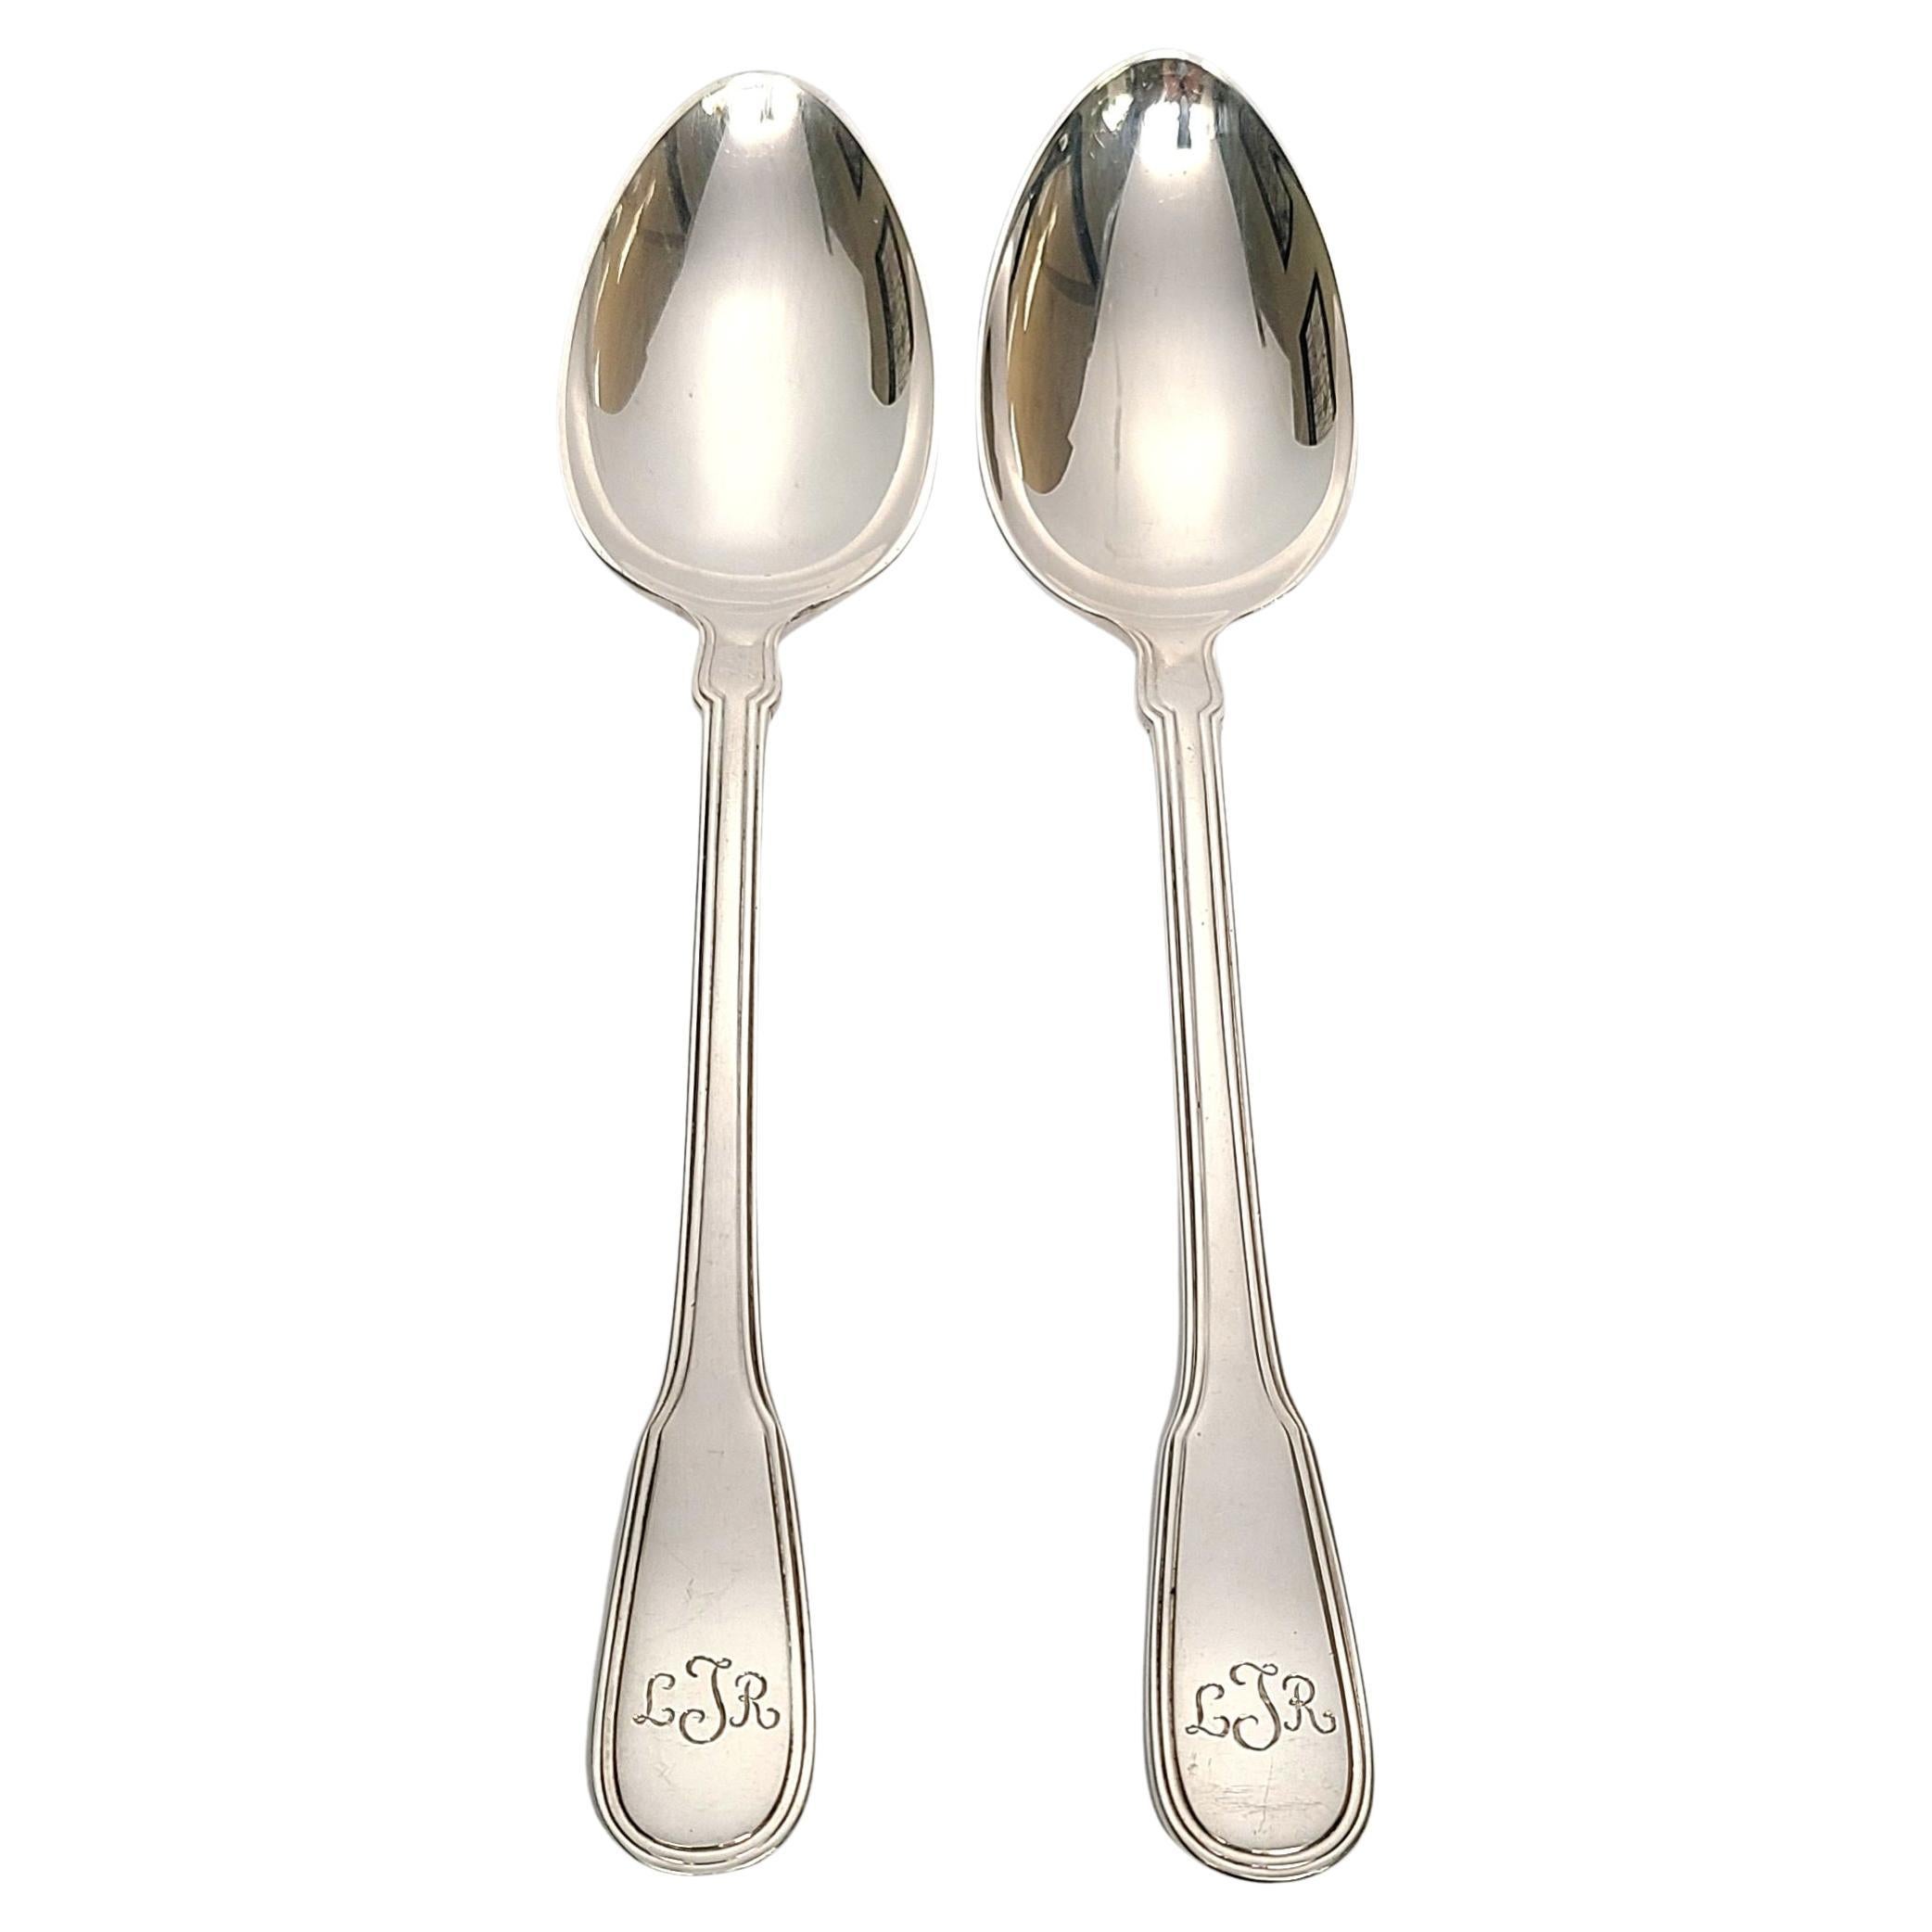 Set of 2 Tiffany & Co Sterling Silver Gramercy Serving Table Spoon with Monogram